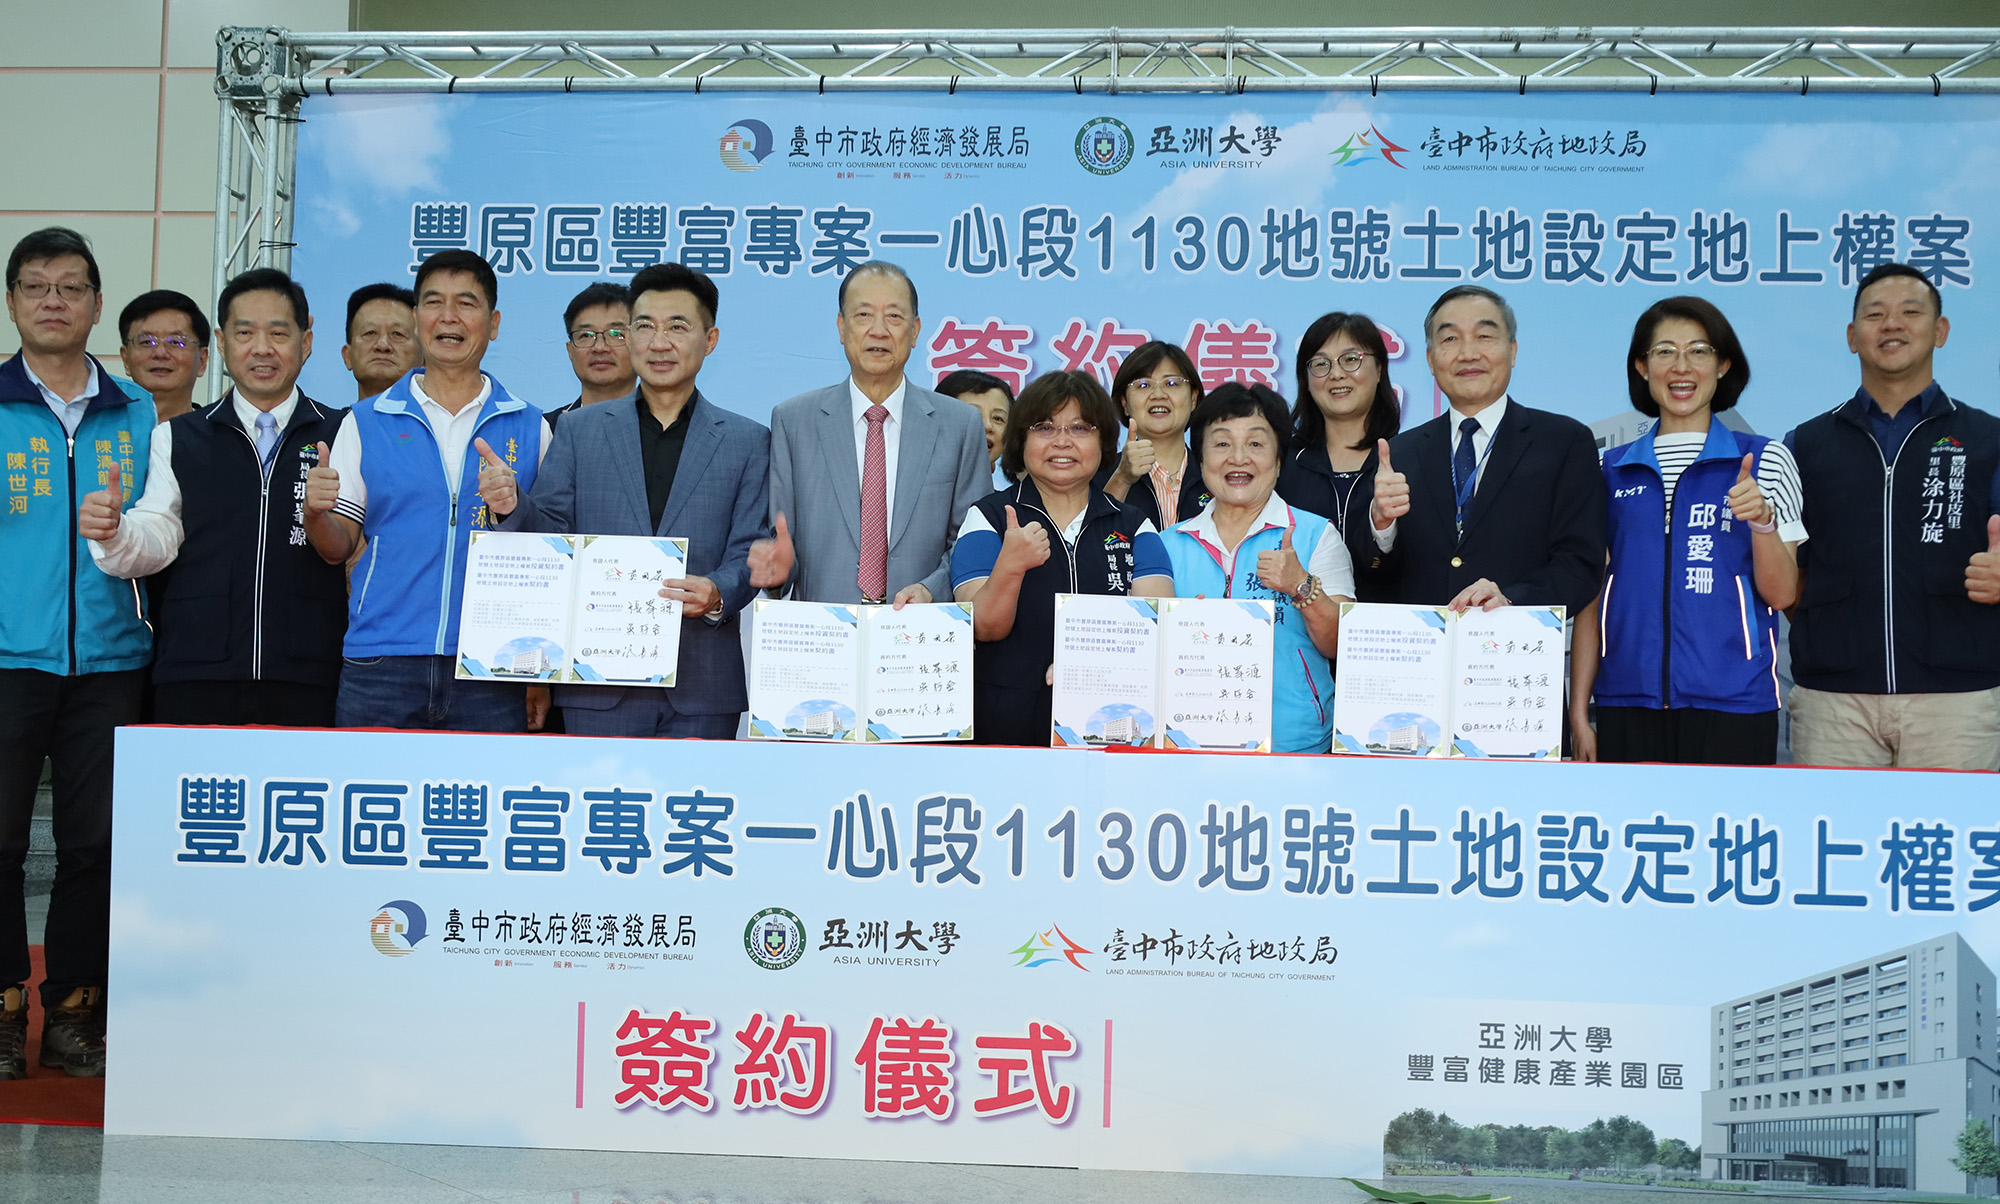 Deputy Mayor Guo-Rong Huang of Taichung City Government (3rd from the right), Chairman Chang-Hai Tsai of Asia University (6th from the right), along with officials and representatives in attendance at the signing ceremony of the "Fengfu Project," pose for a photo.